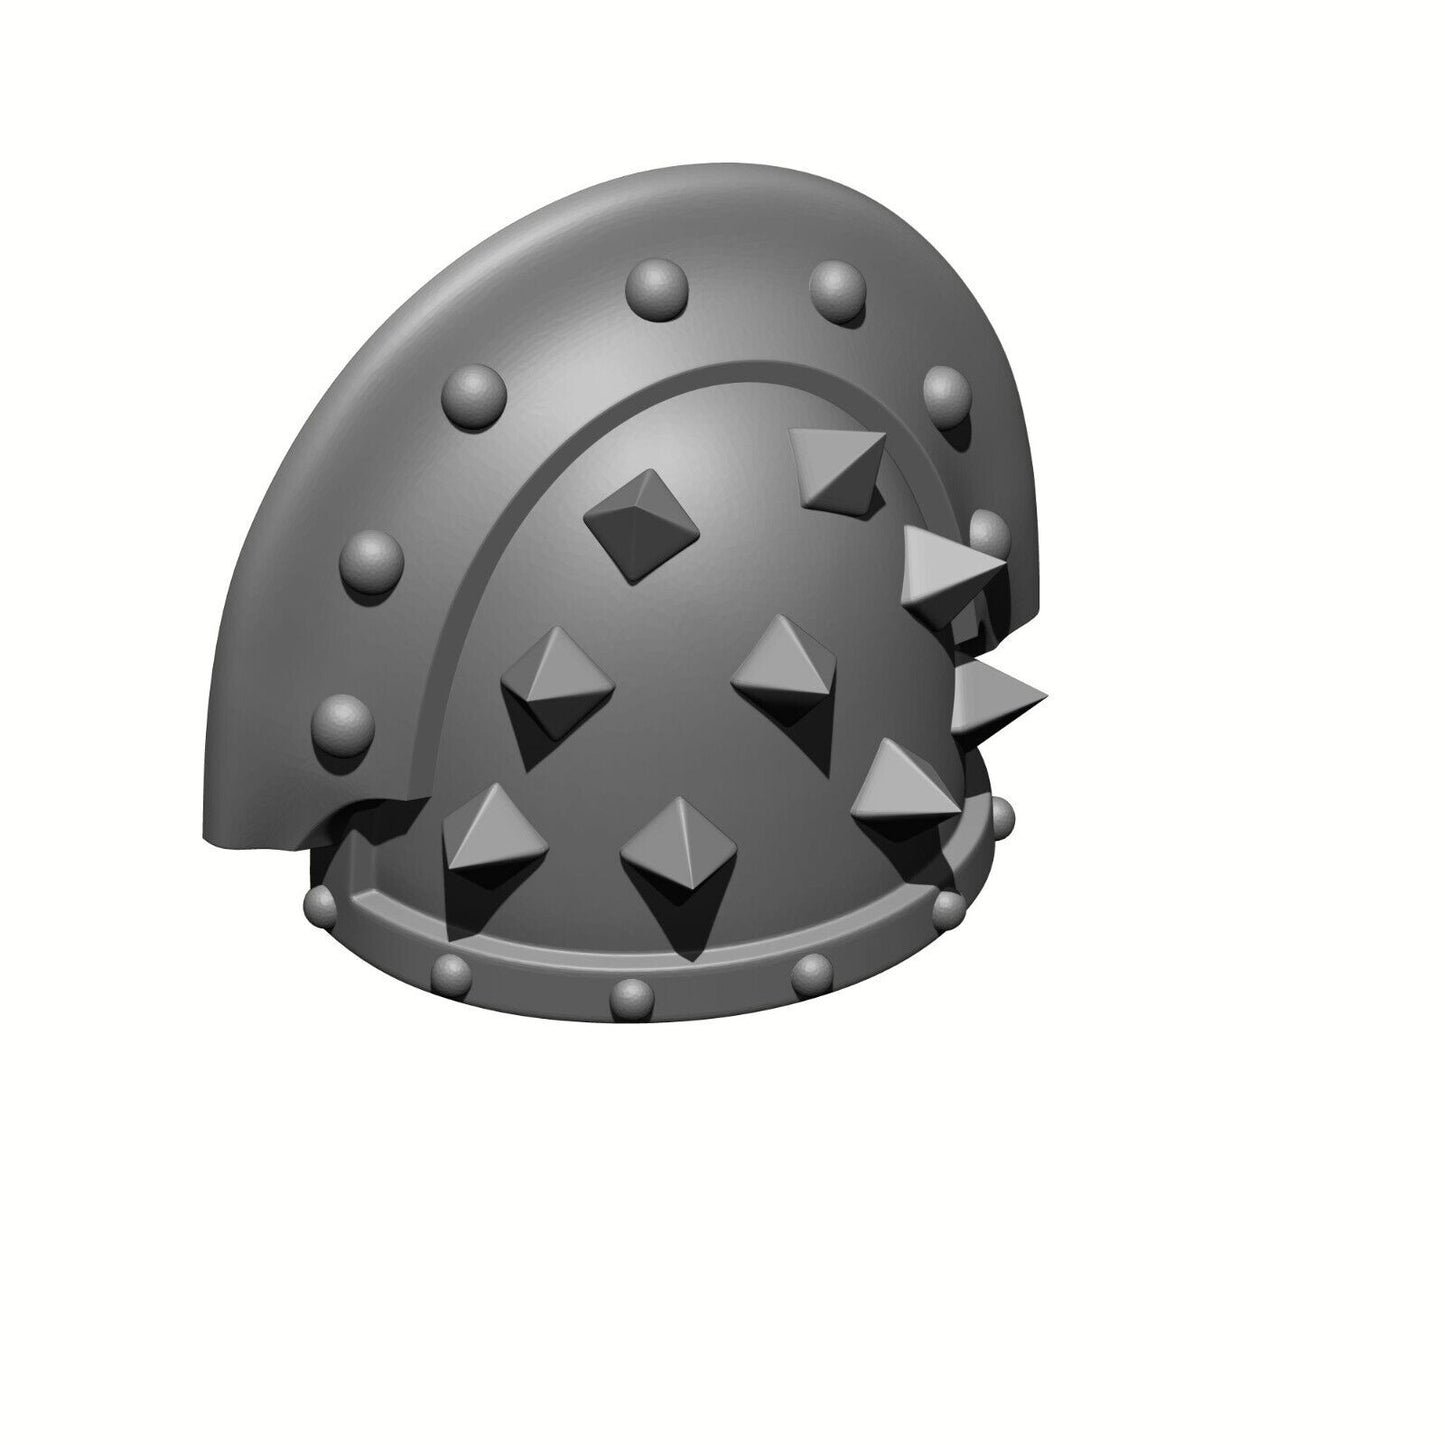 MKIII Shoulder Pad with Large Pyramid Spikes is designed to fit McFarlane Toys Space Marines